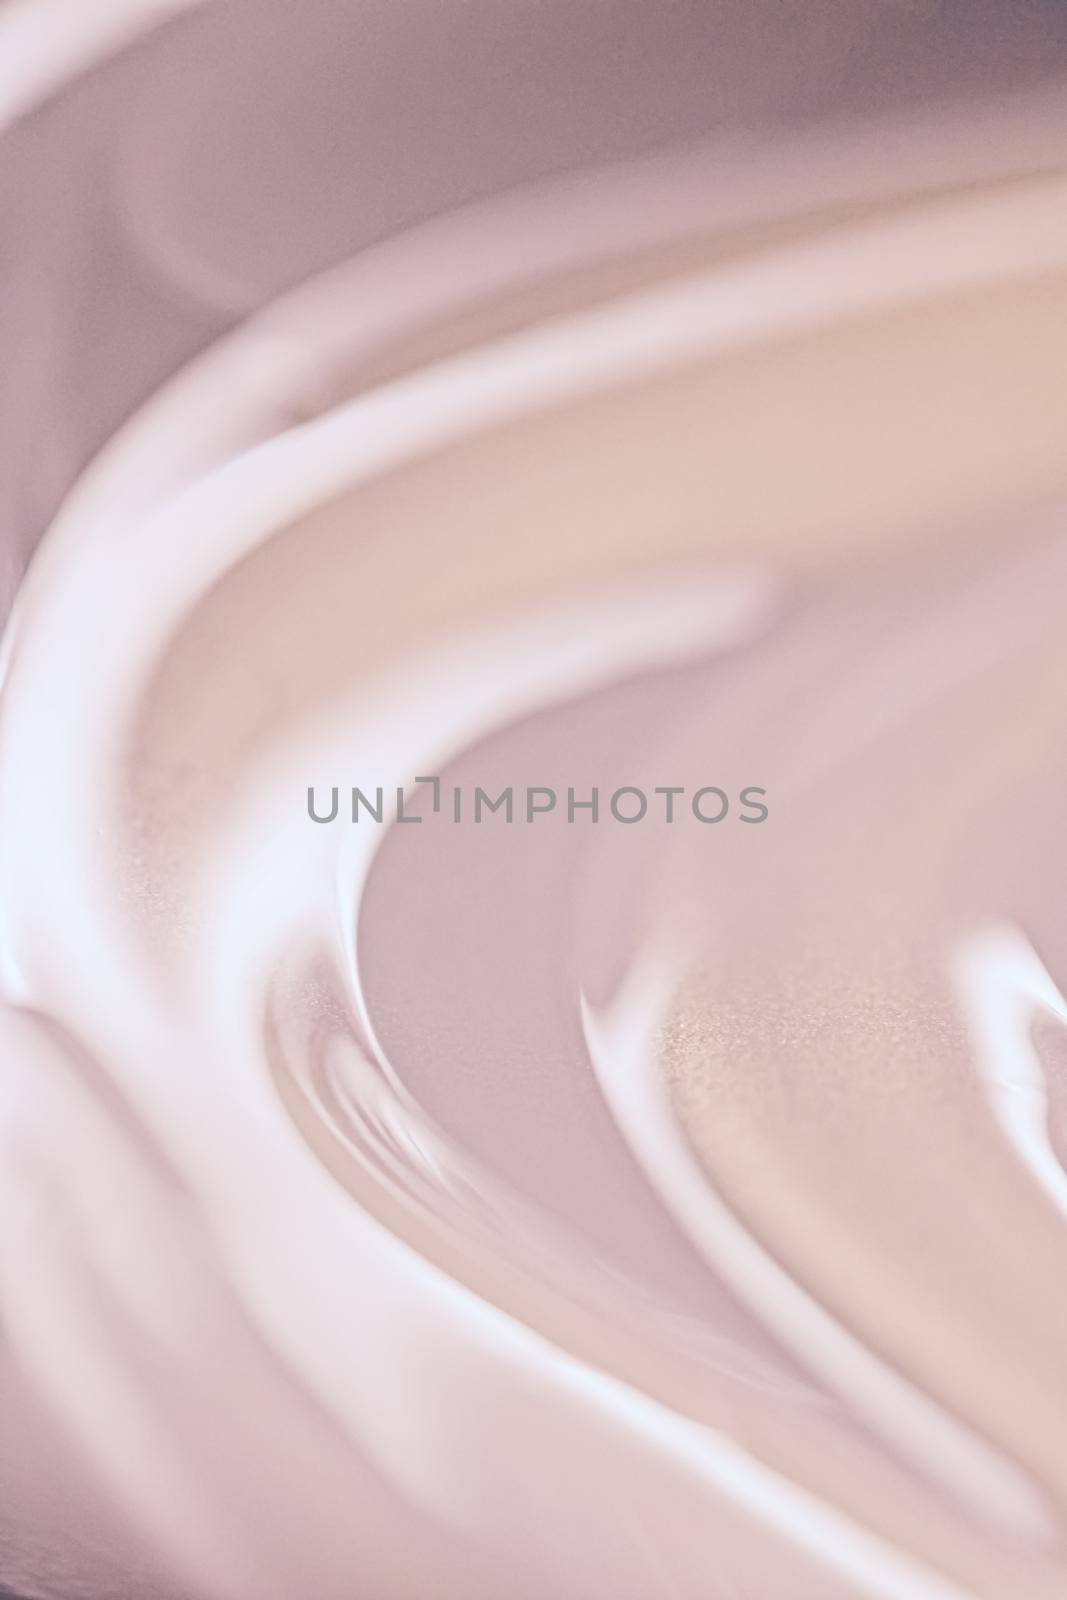 Glowing cosmetic emulsion, rose gold cream or lotion as beauty and skincare background by Anneleven